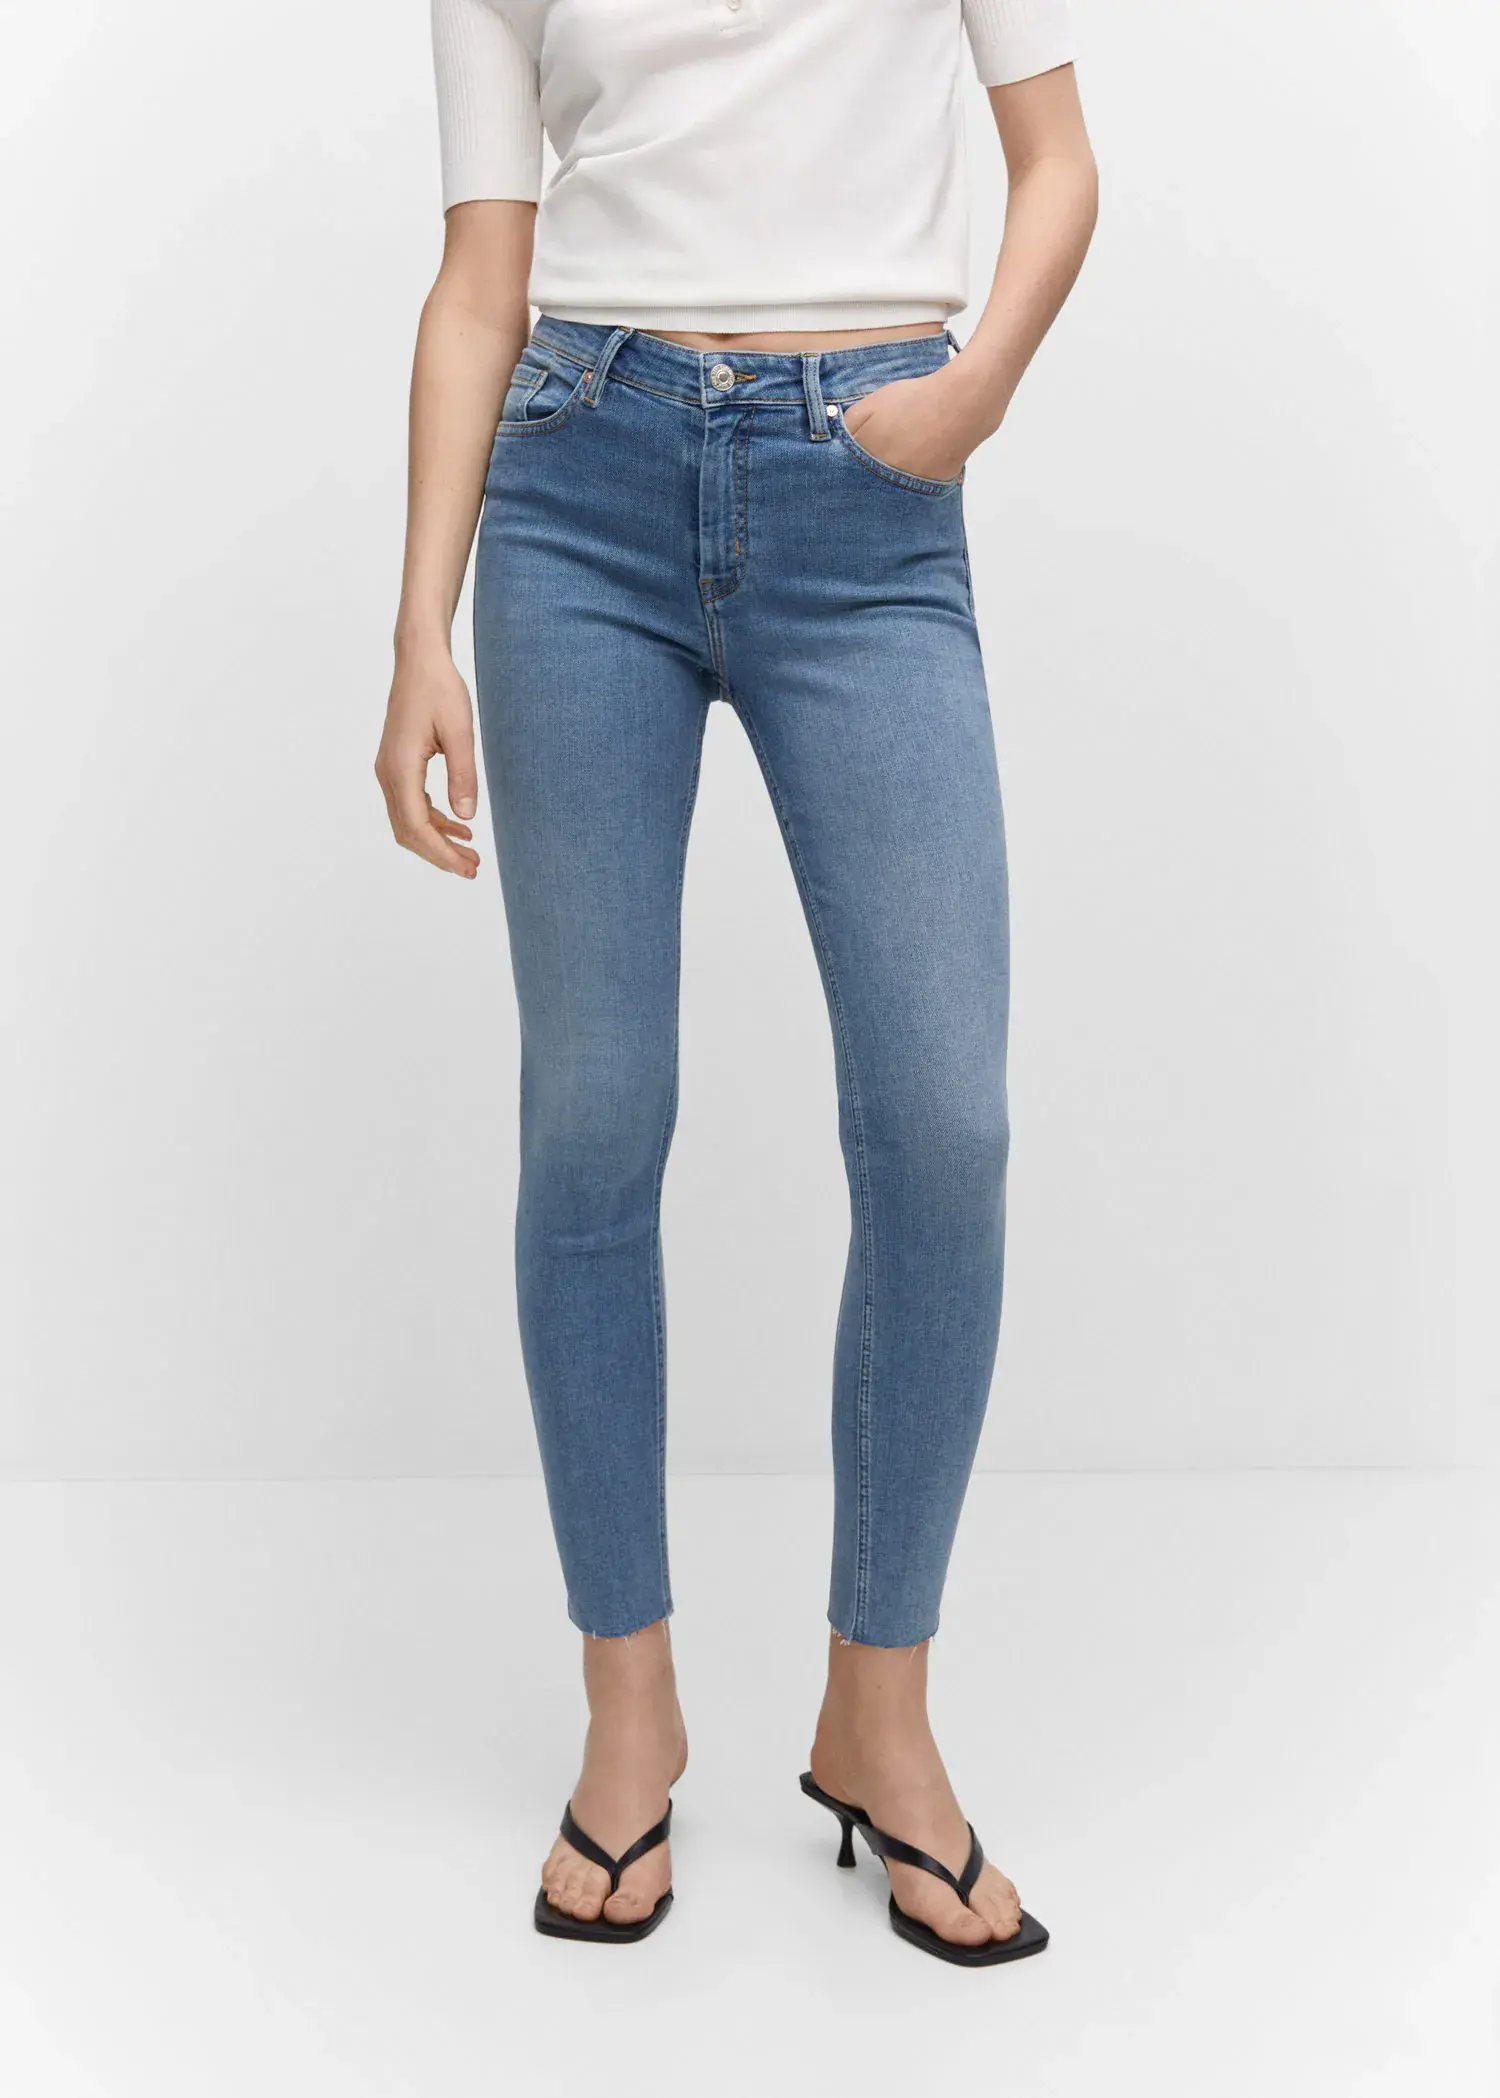 Mango Skinny cropped jeans. a pair of women's jeans are shown in front. 